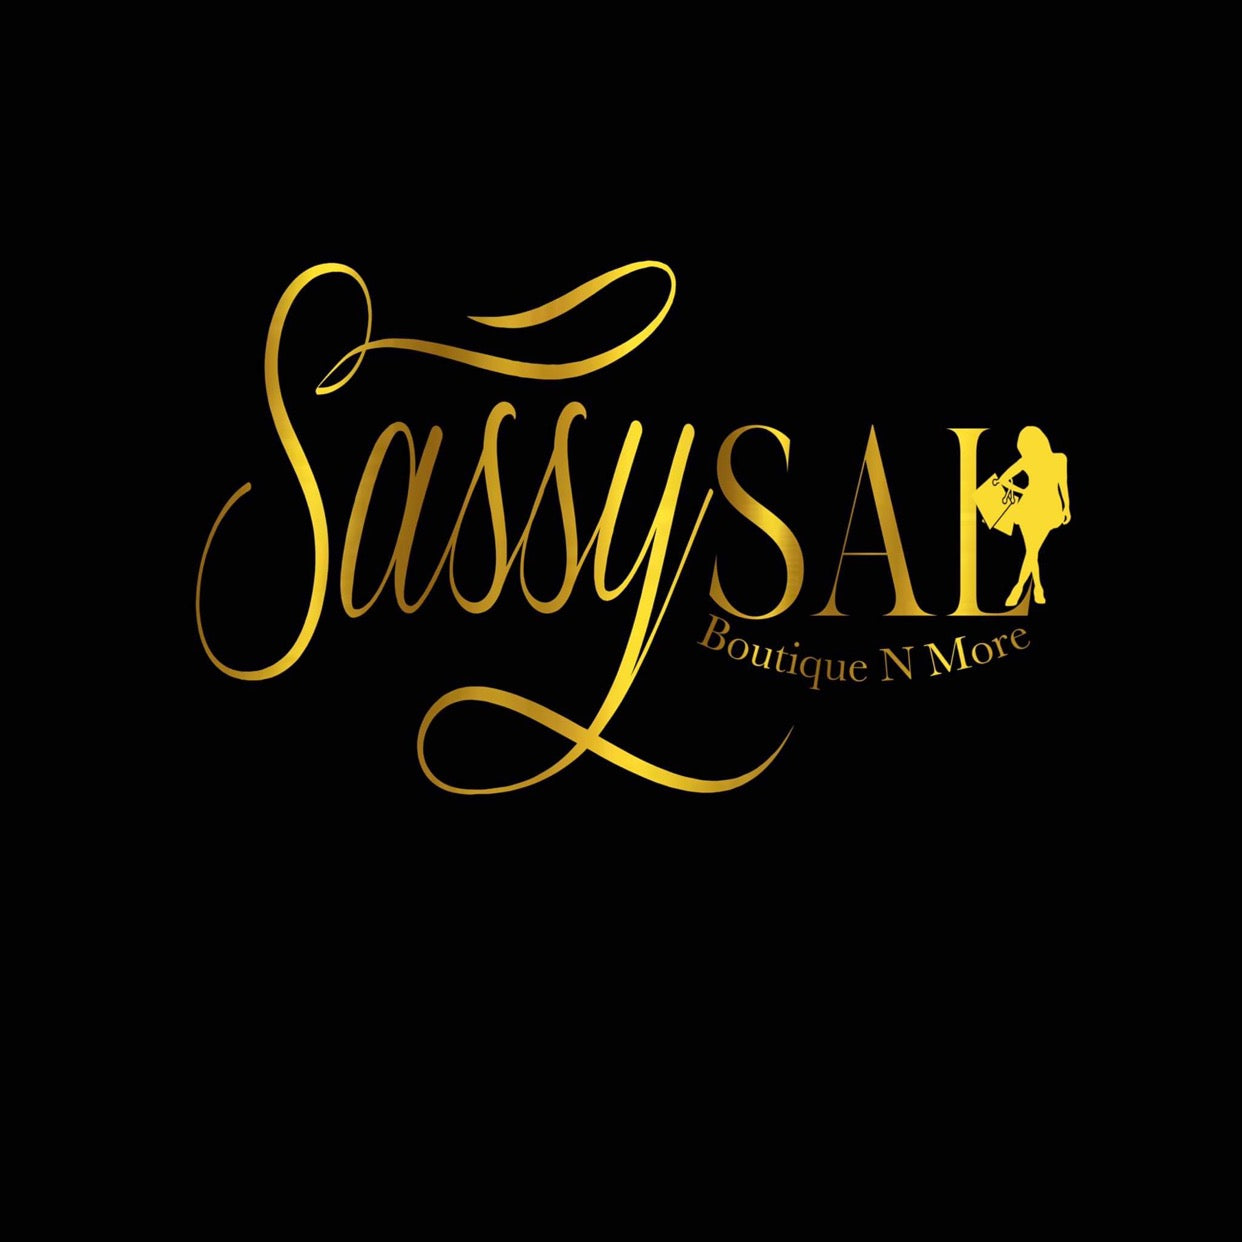 Sassy Sal Boutique N More